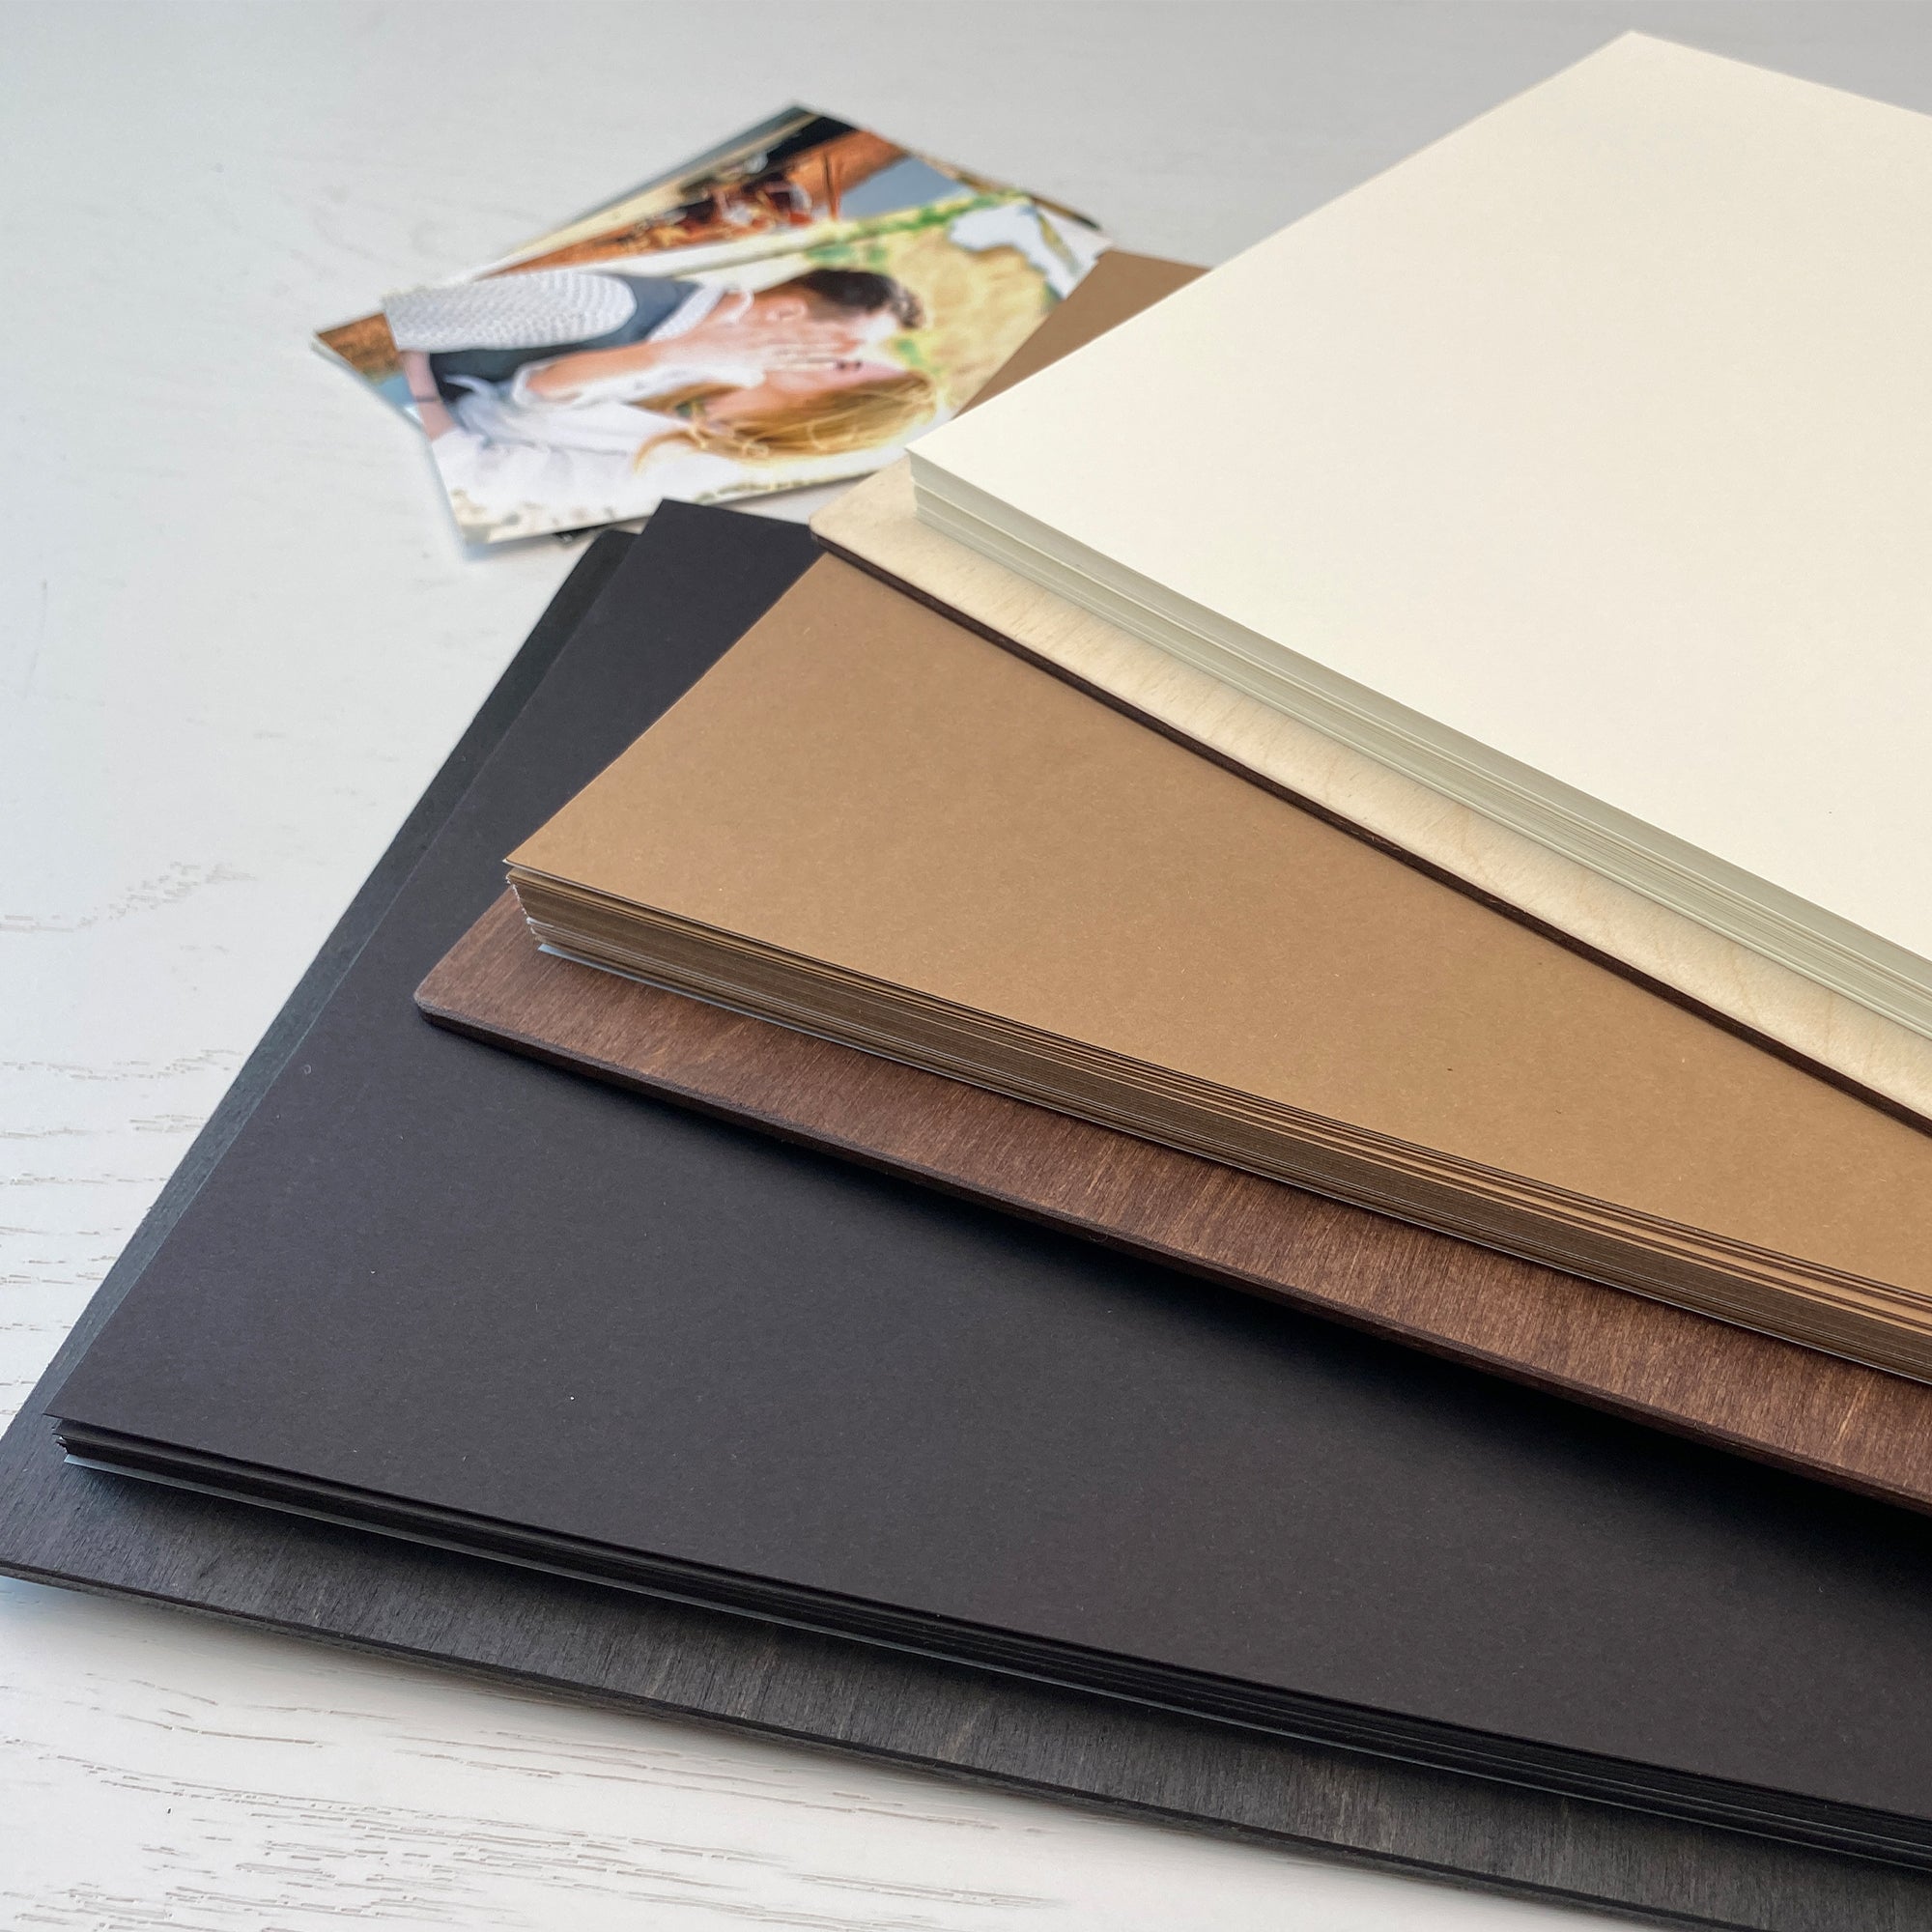 Personalized photo album with leather cover and Family engraving